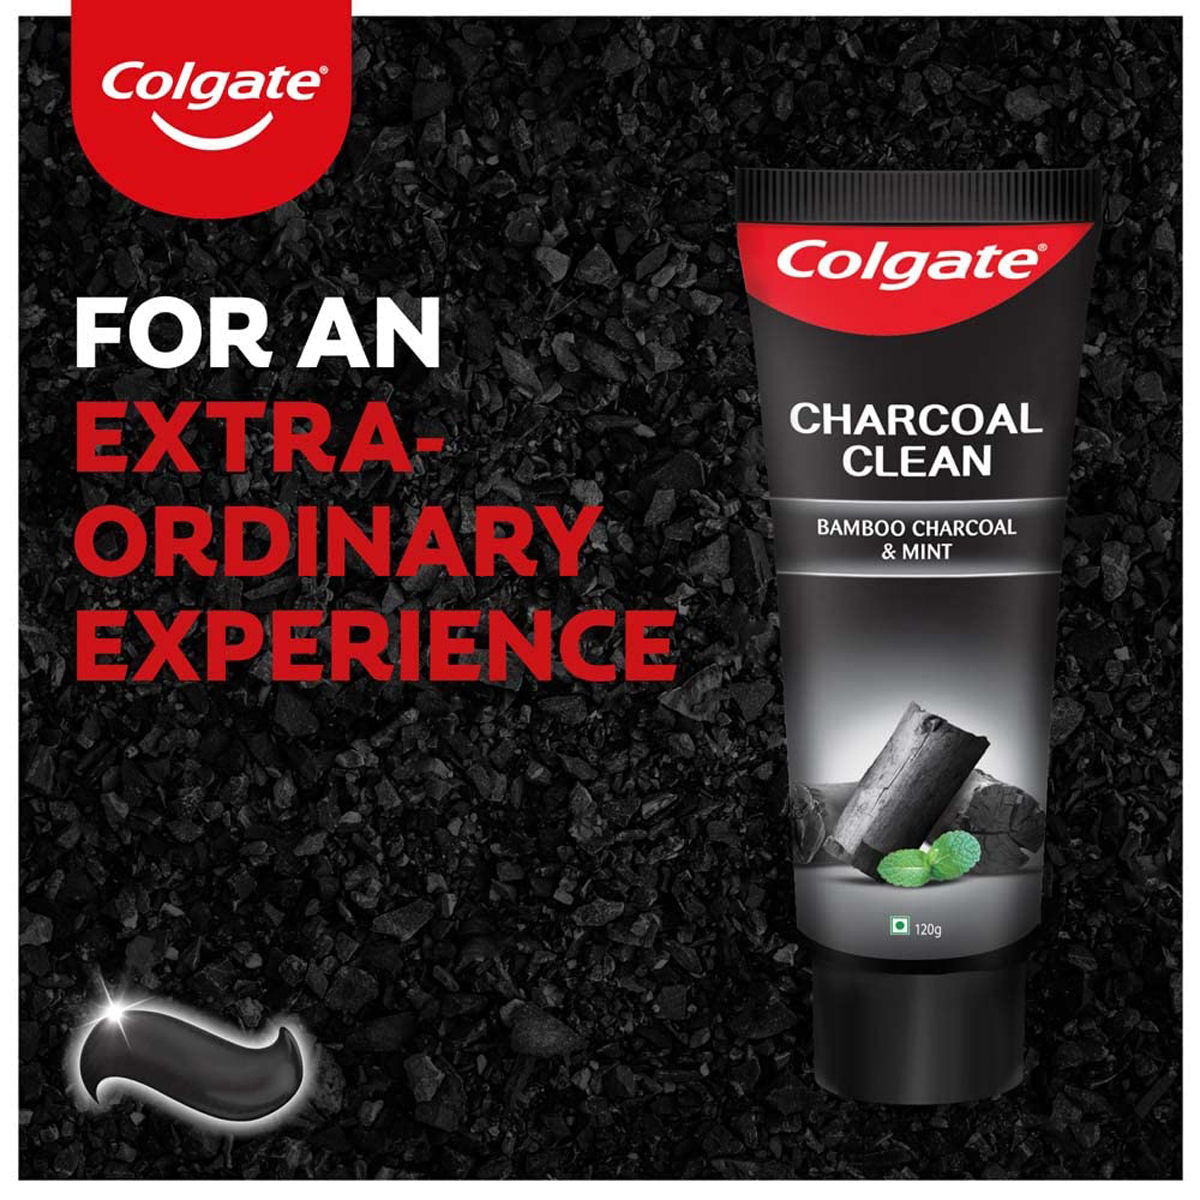 Colgate Charcoal Clean Toothpaste Bamboo Charcoal & Mint, 120 gm, Pack of 1 